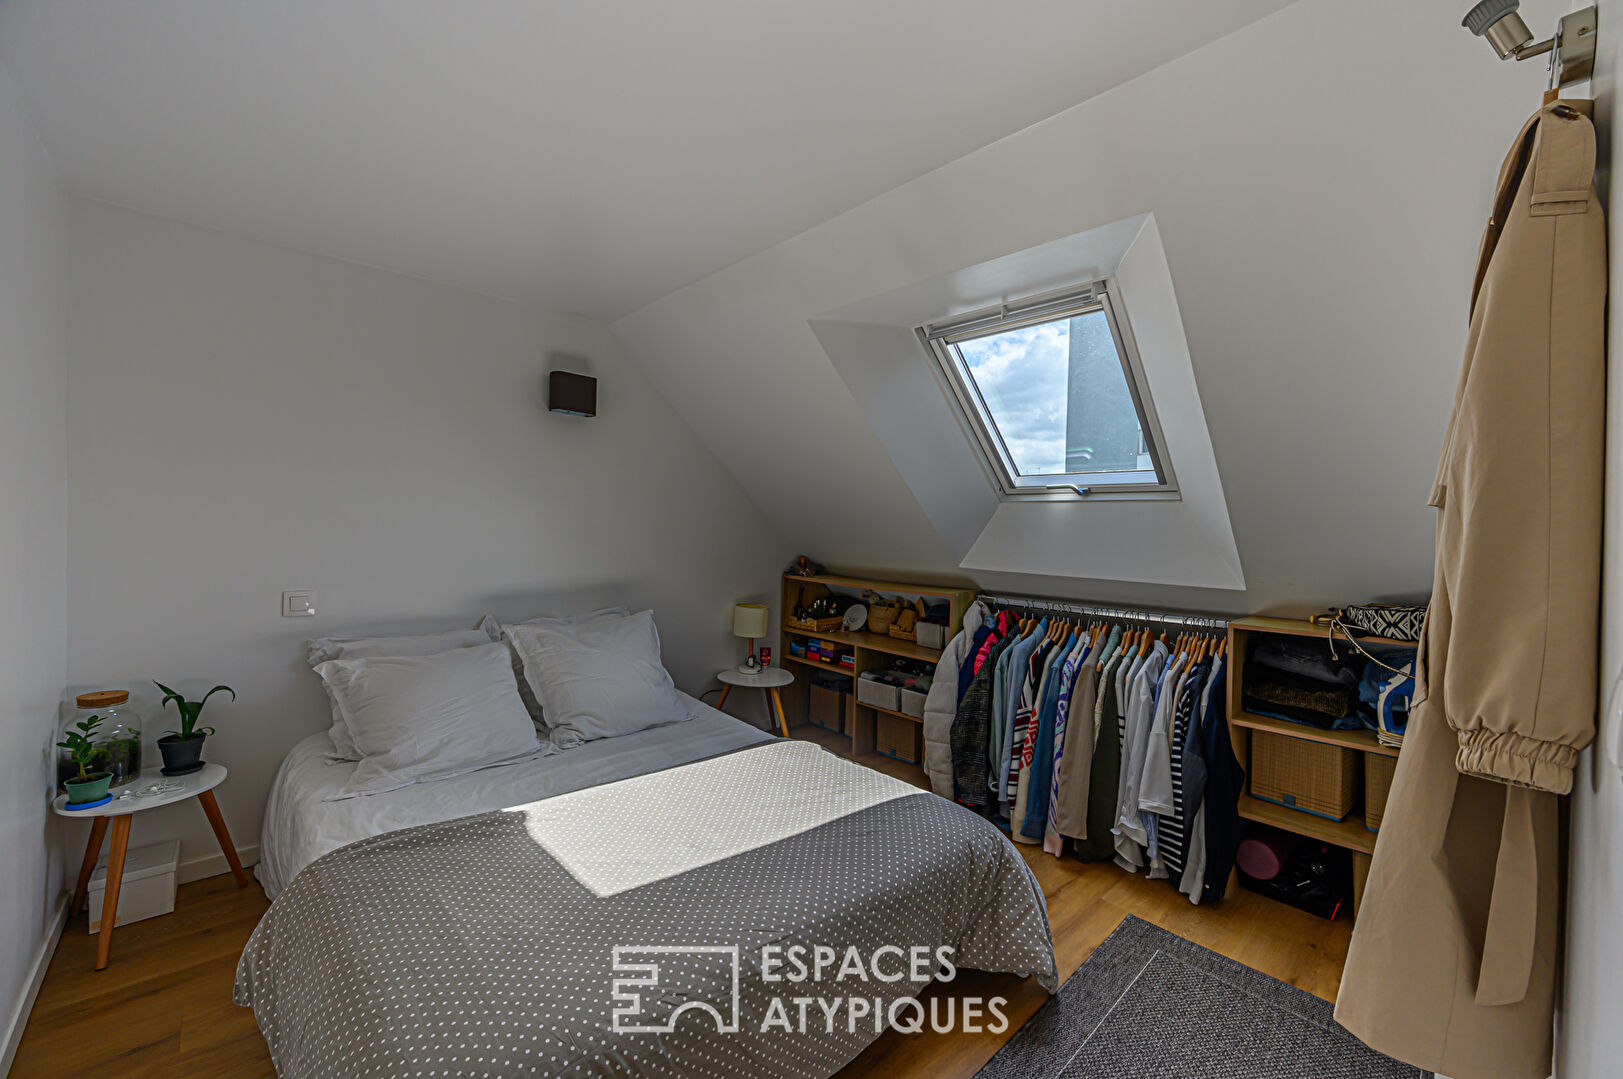 Renovated duplex in the heart of the city of Vannes